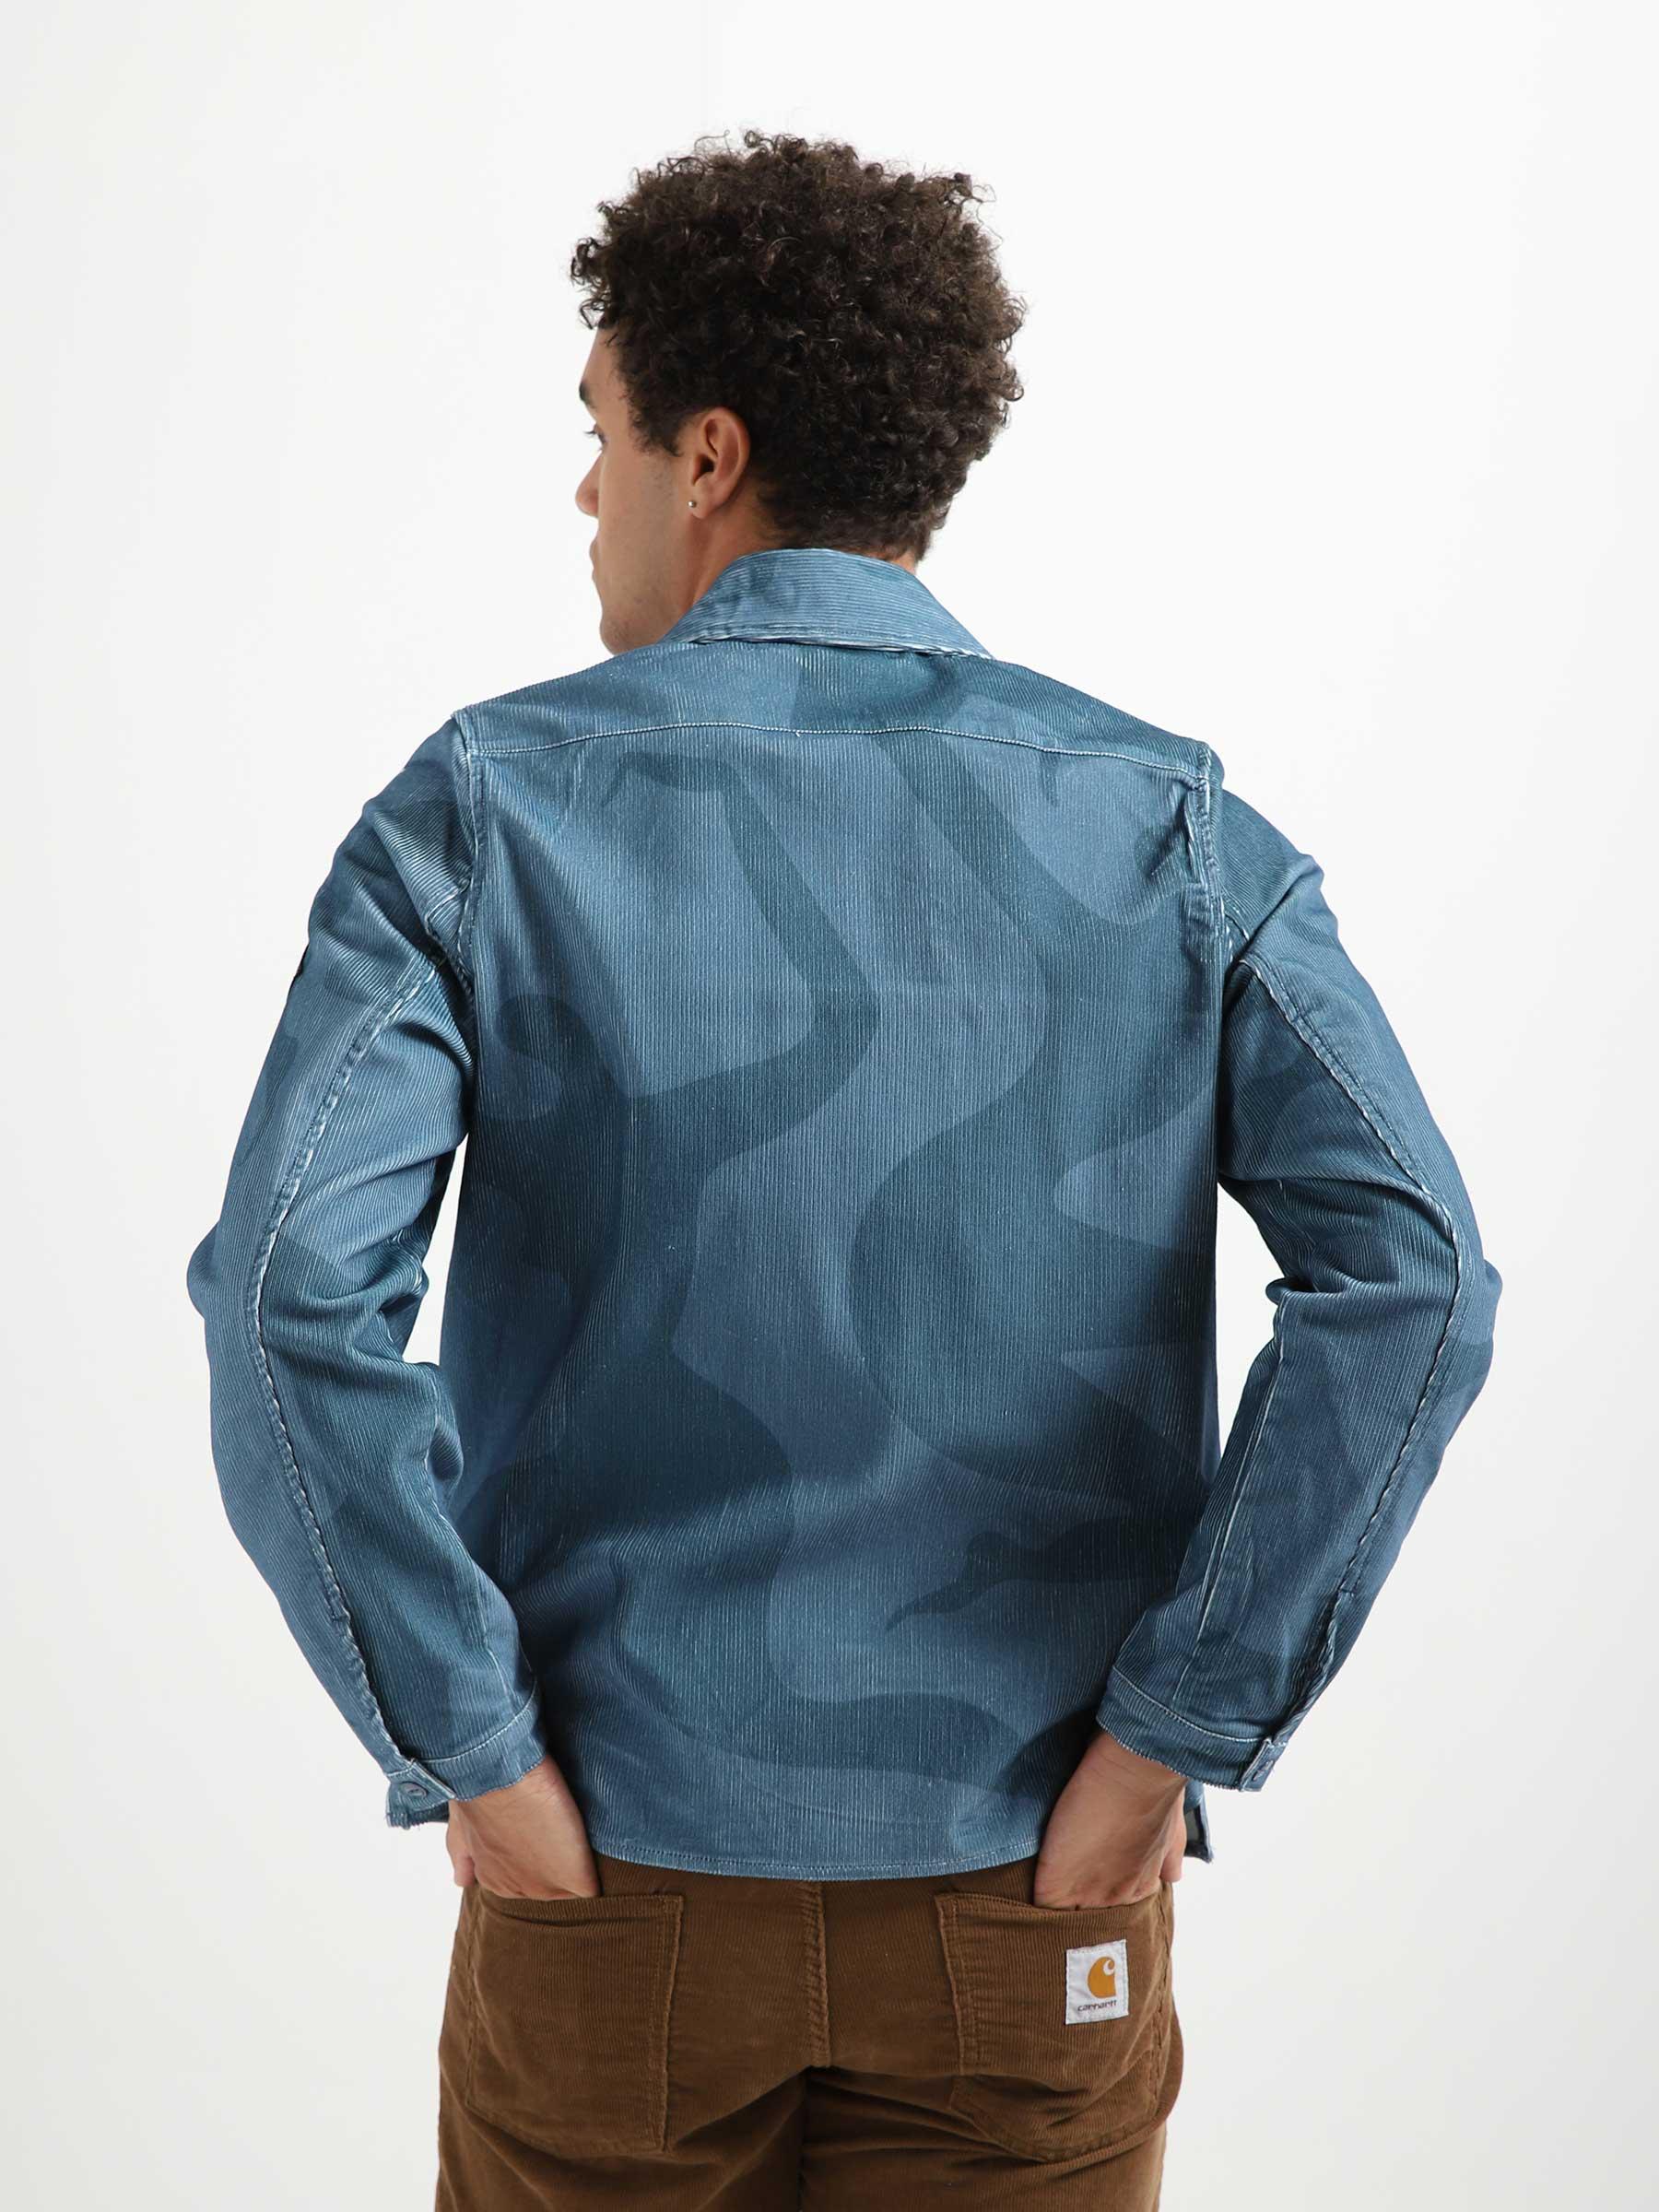 Army Dreamers Woven Shirt Jacket Blue Grey 49120